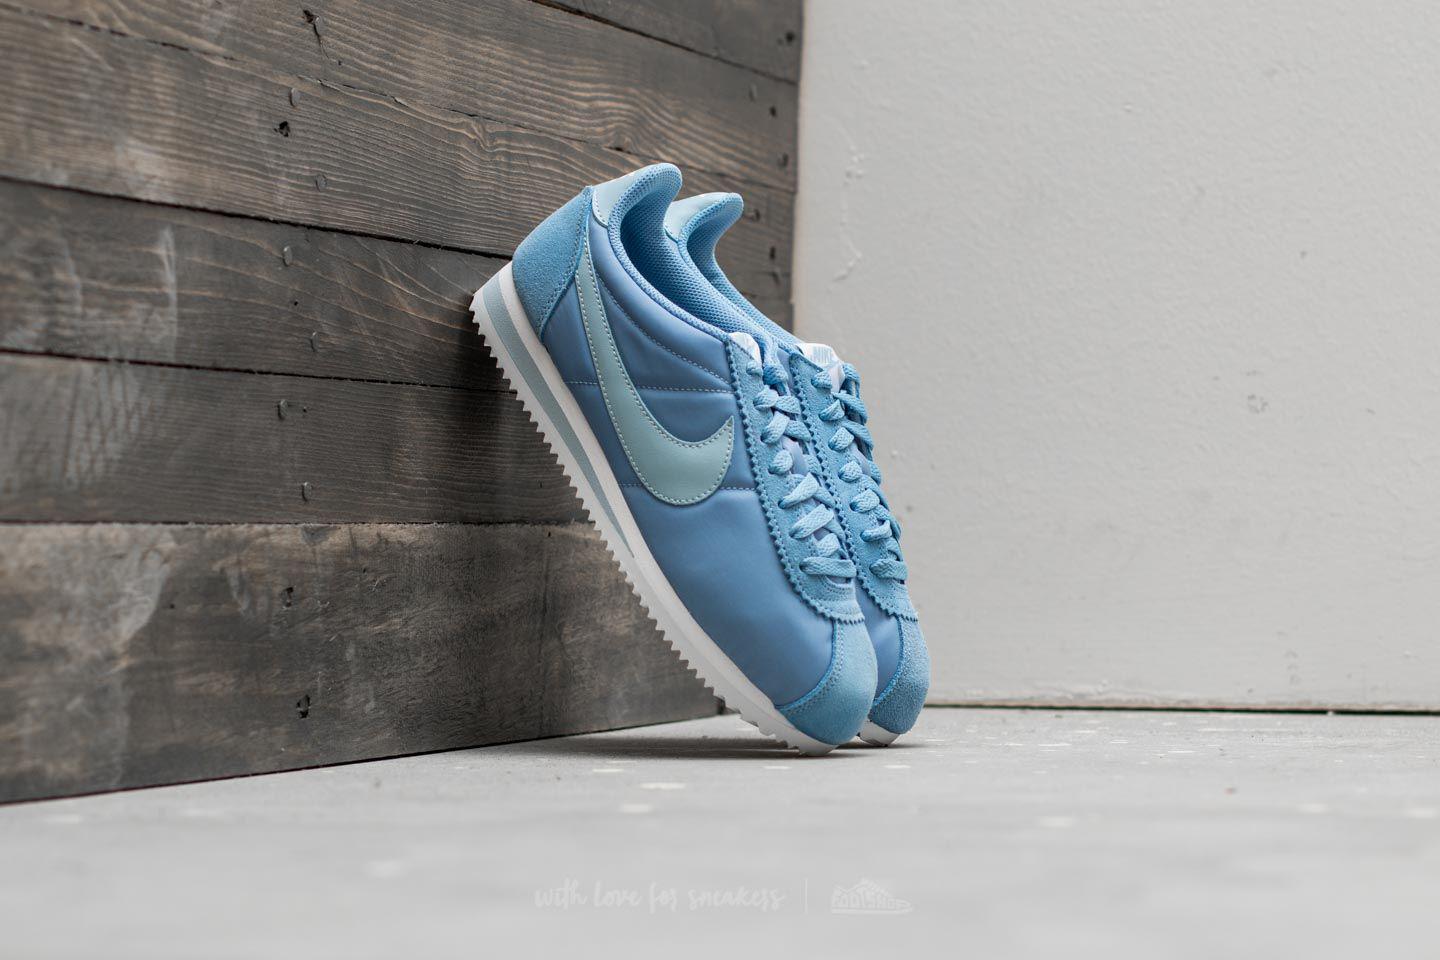 lade angreb whisky Nike Wmns Classic Cortez Nylon December Sky/ Light Armory Blue | Lyst